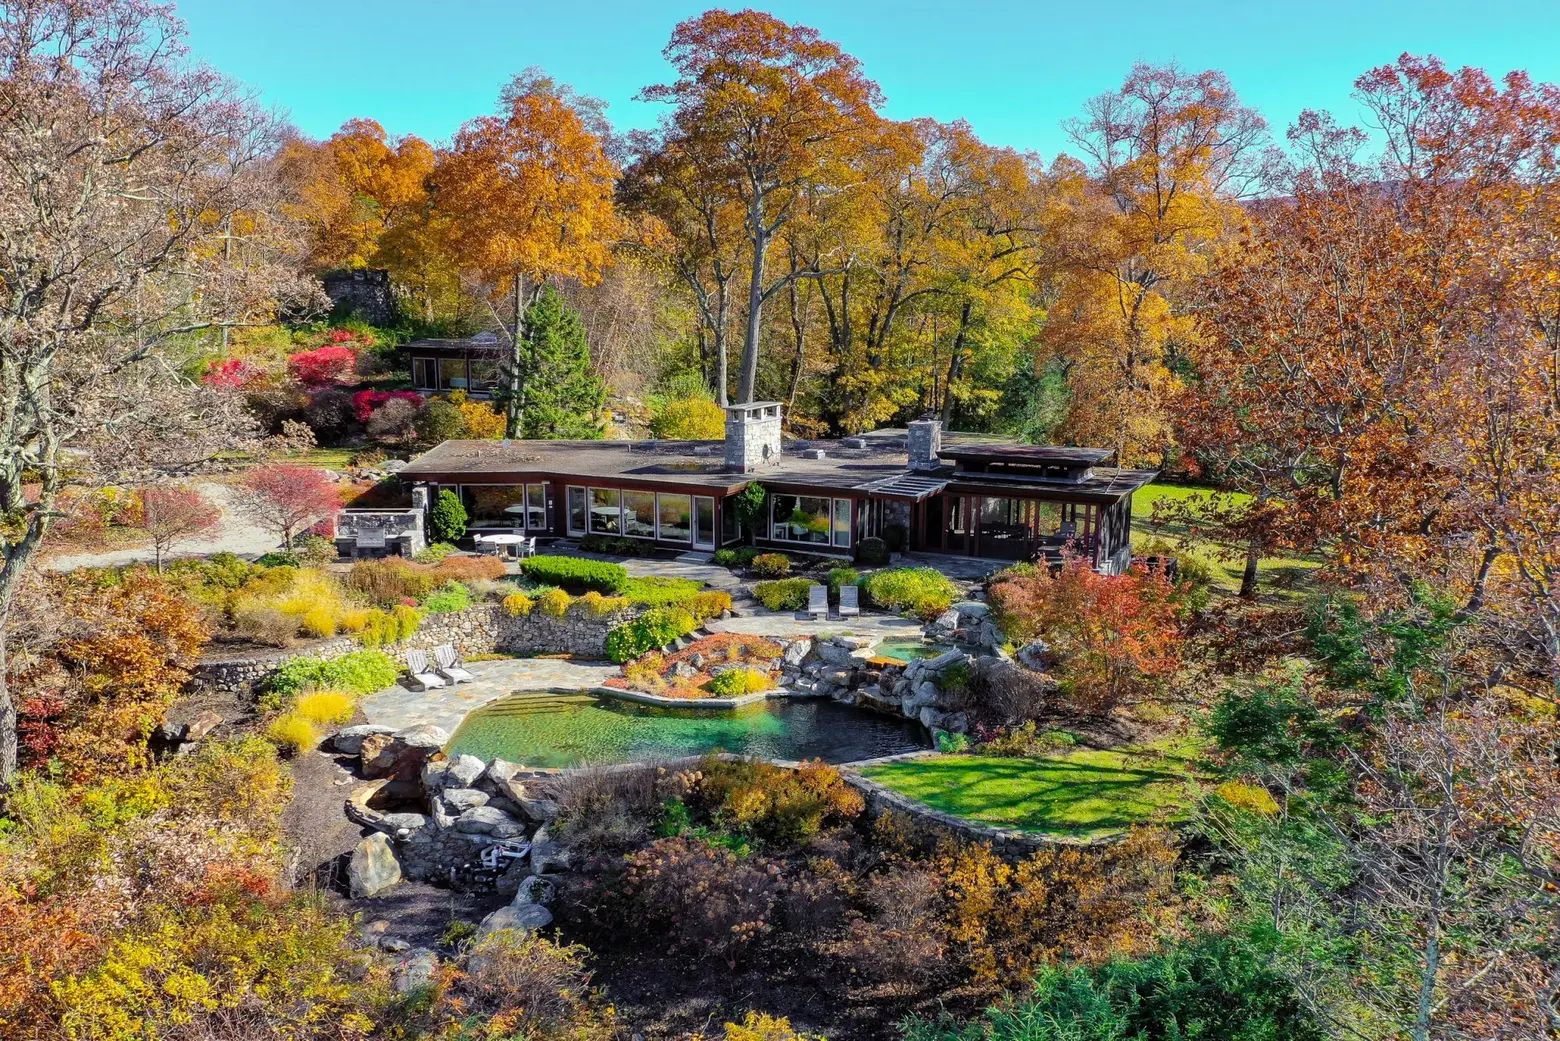 Hudson River views abound at this six-acre Garrison estate, designed by a Frank Lloyd Wright disciple